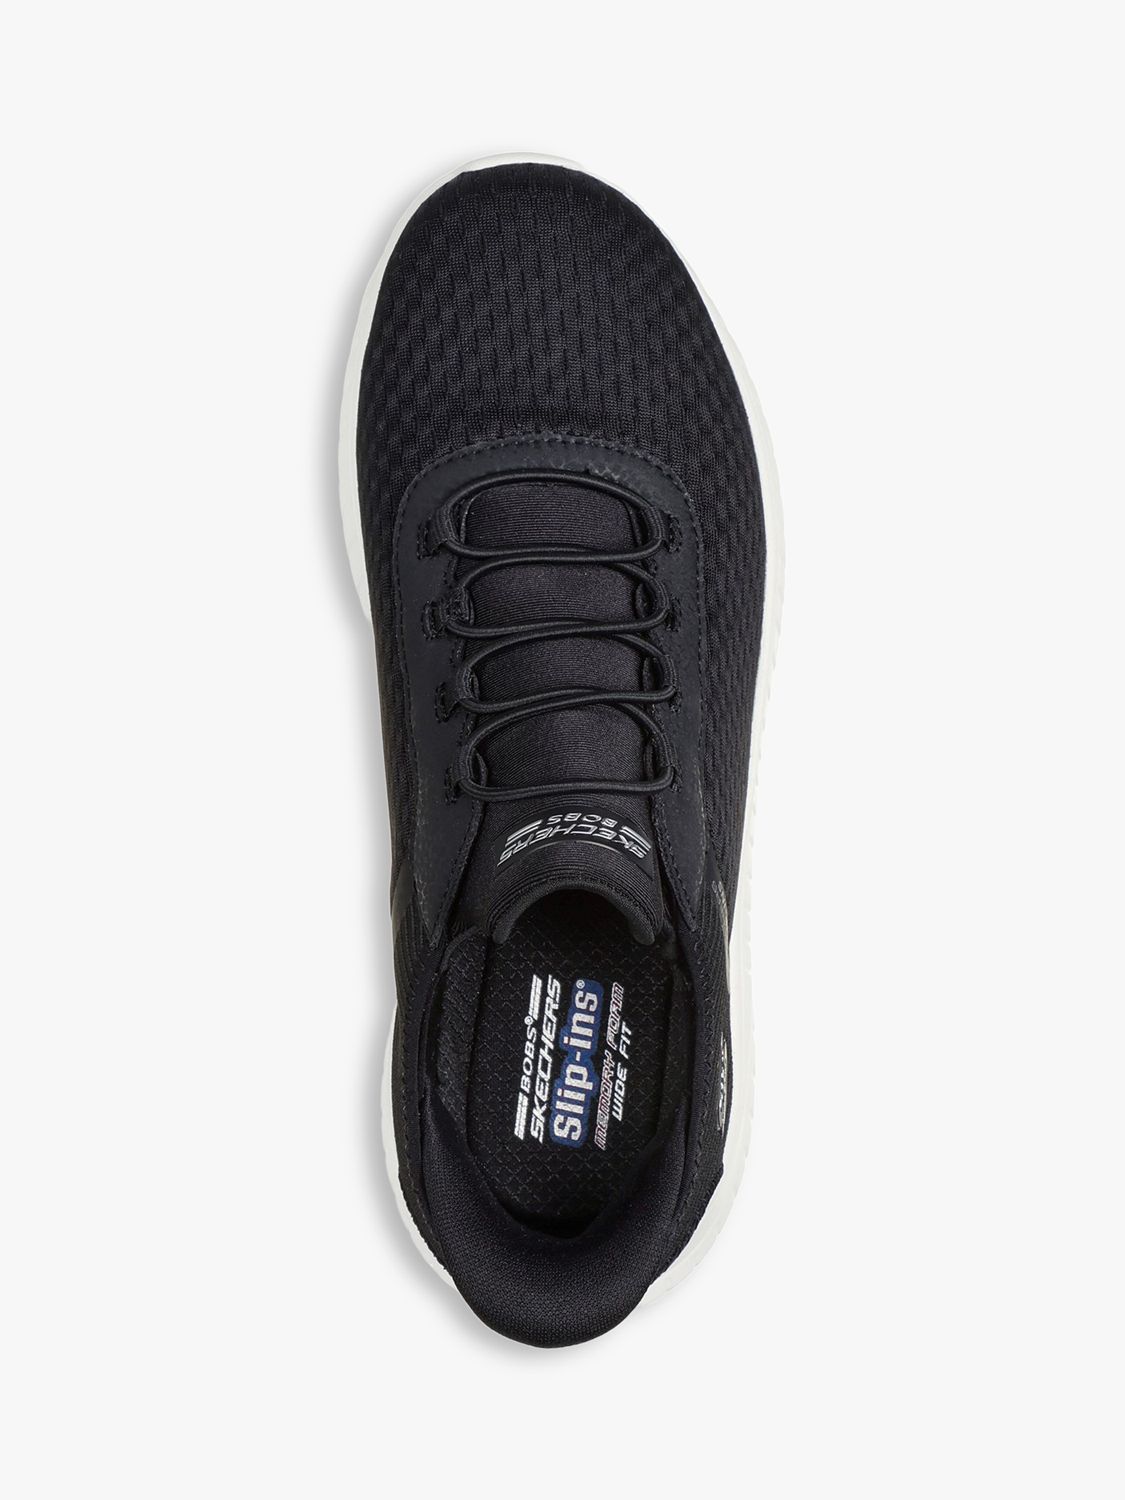 Buy Skechers Bobs Sport Squad Chaos Trainers, Black Online at johnlewis.com